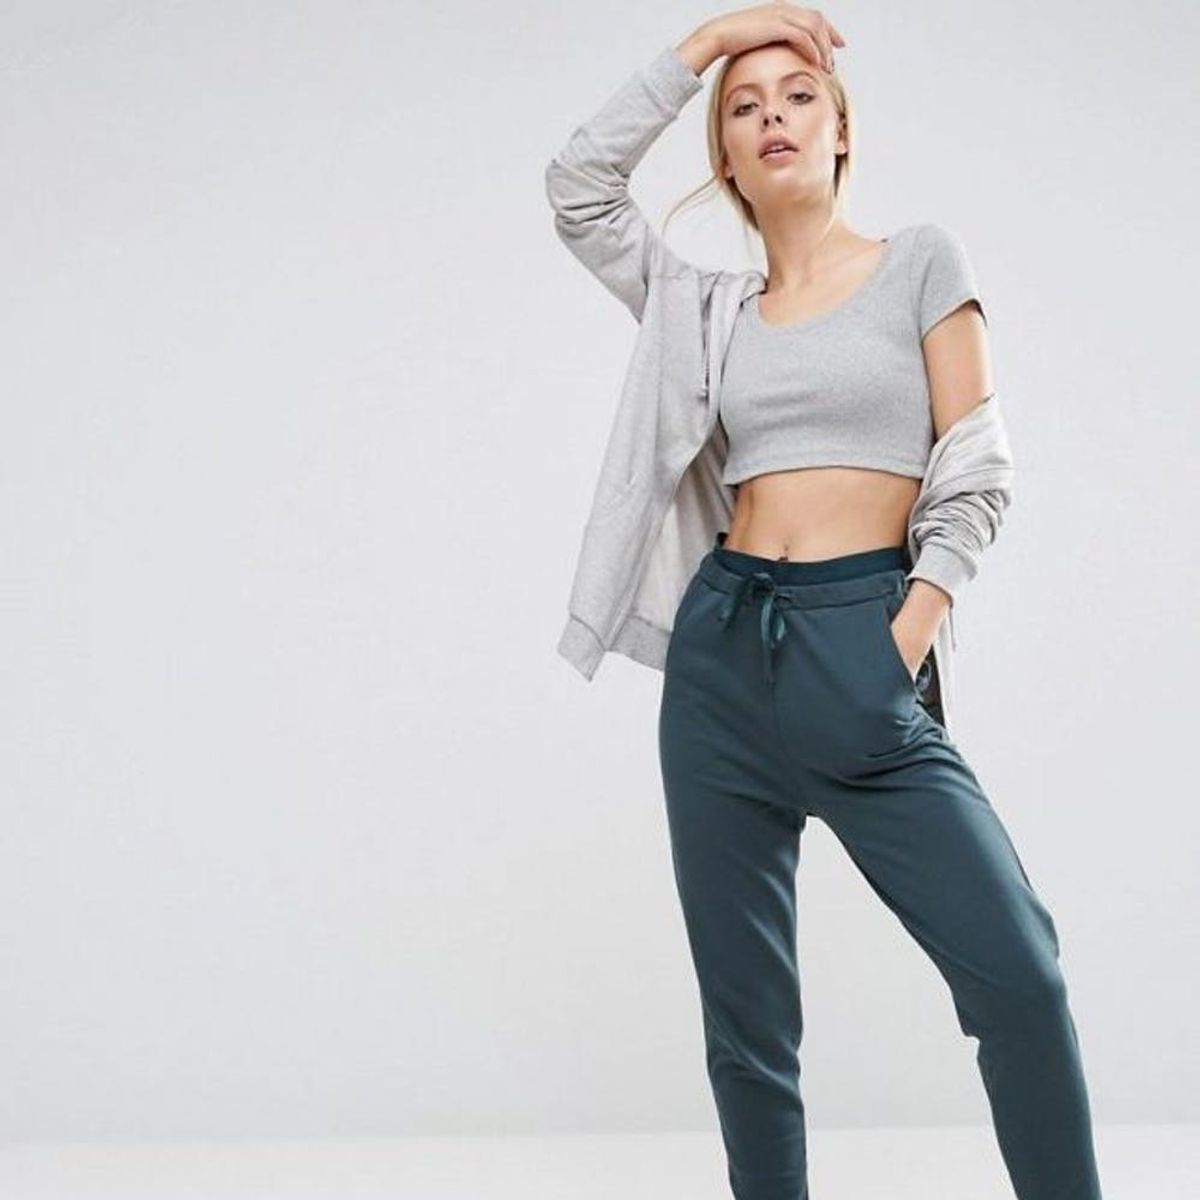 Mourn the Loss of American Apparel With These 7 Replacement Brands